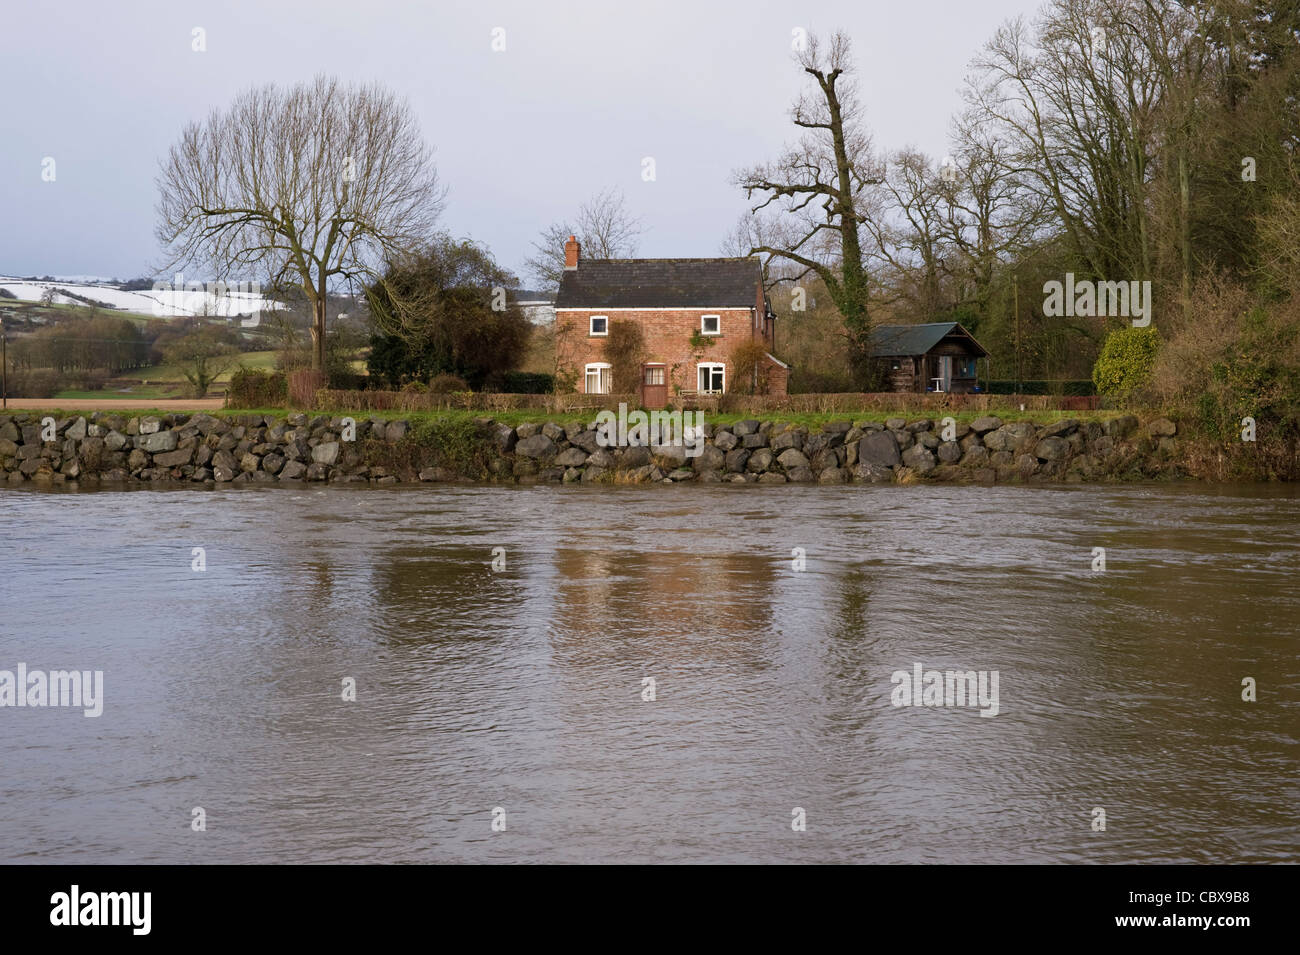 Idilliaca Società Nethouse cottage sulle rive del fiume Wye in flood vicino a Hay-on-Wye Powys Wales UK Foto Stock